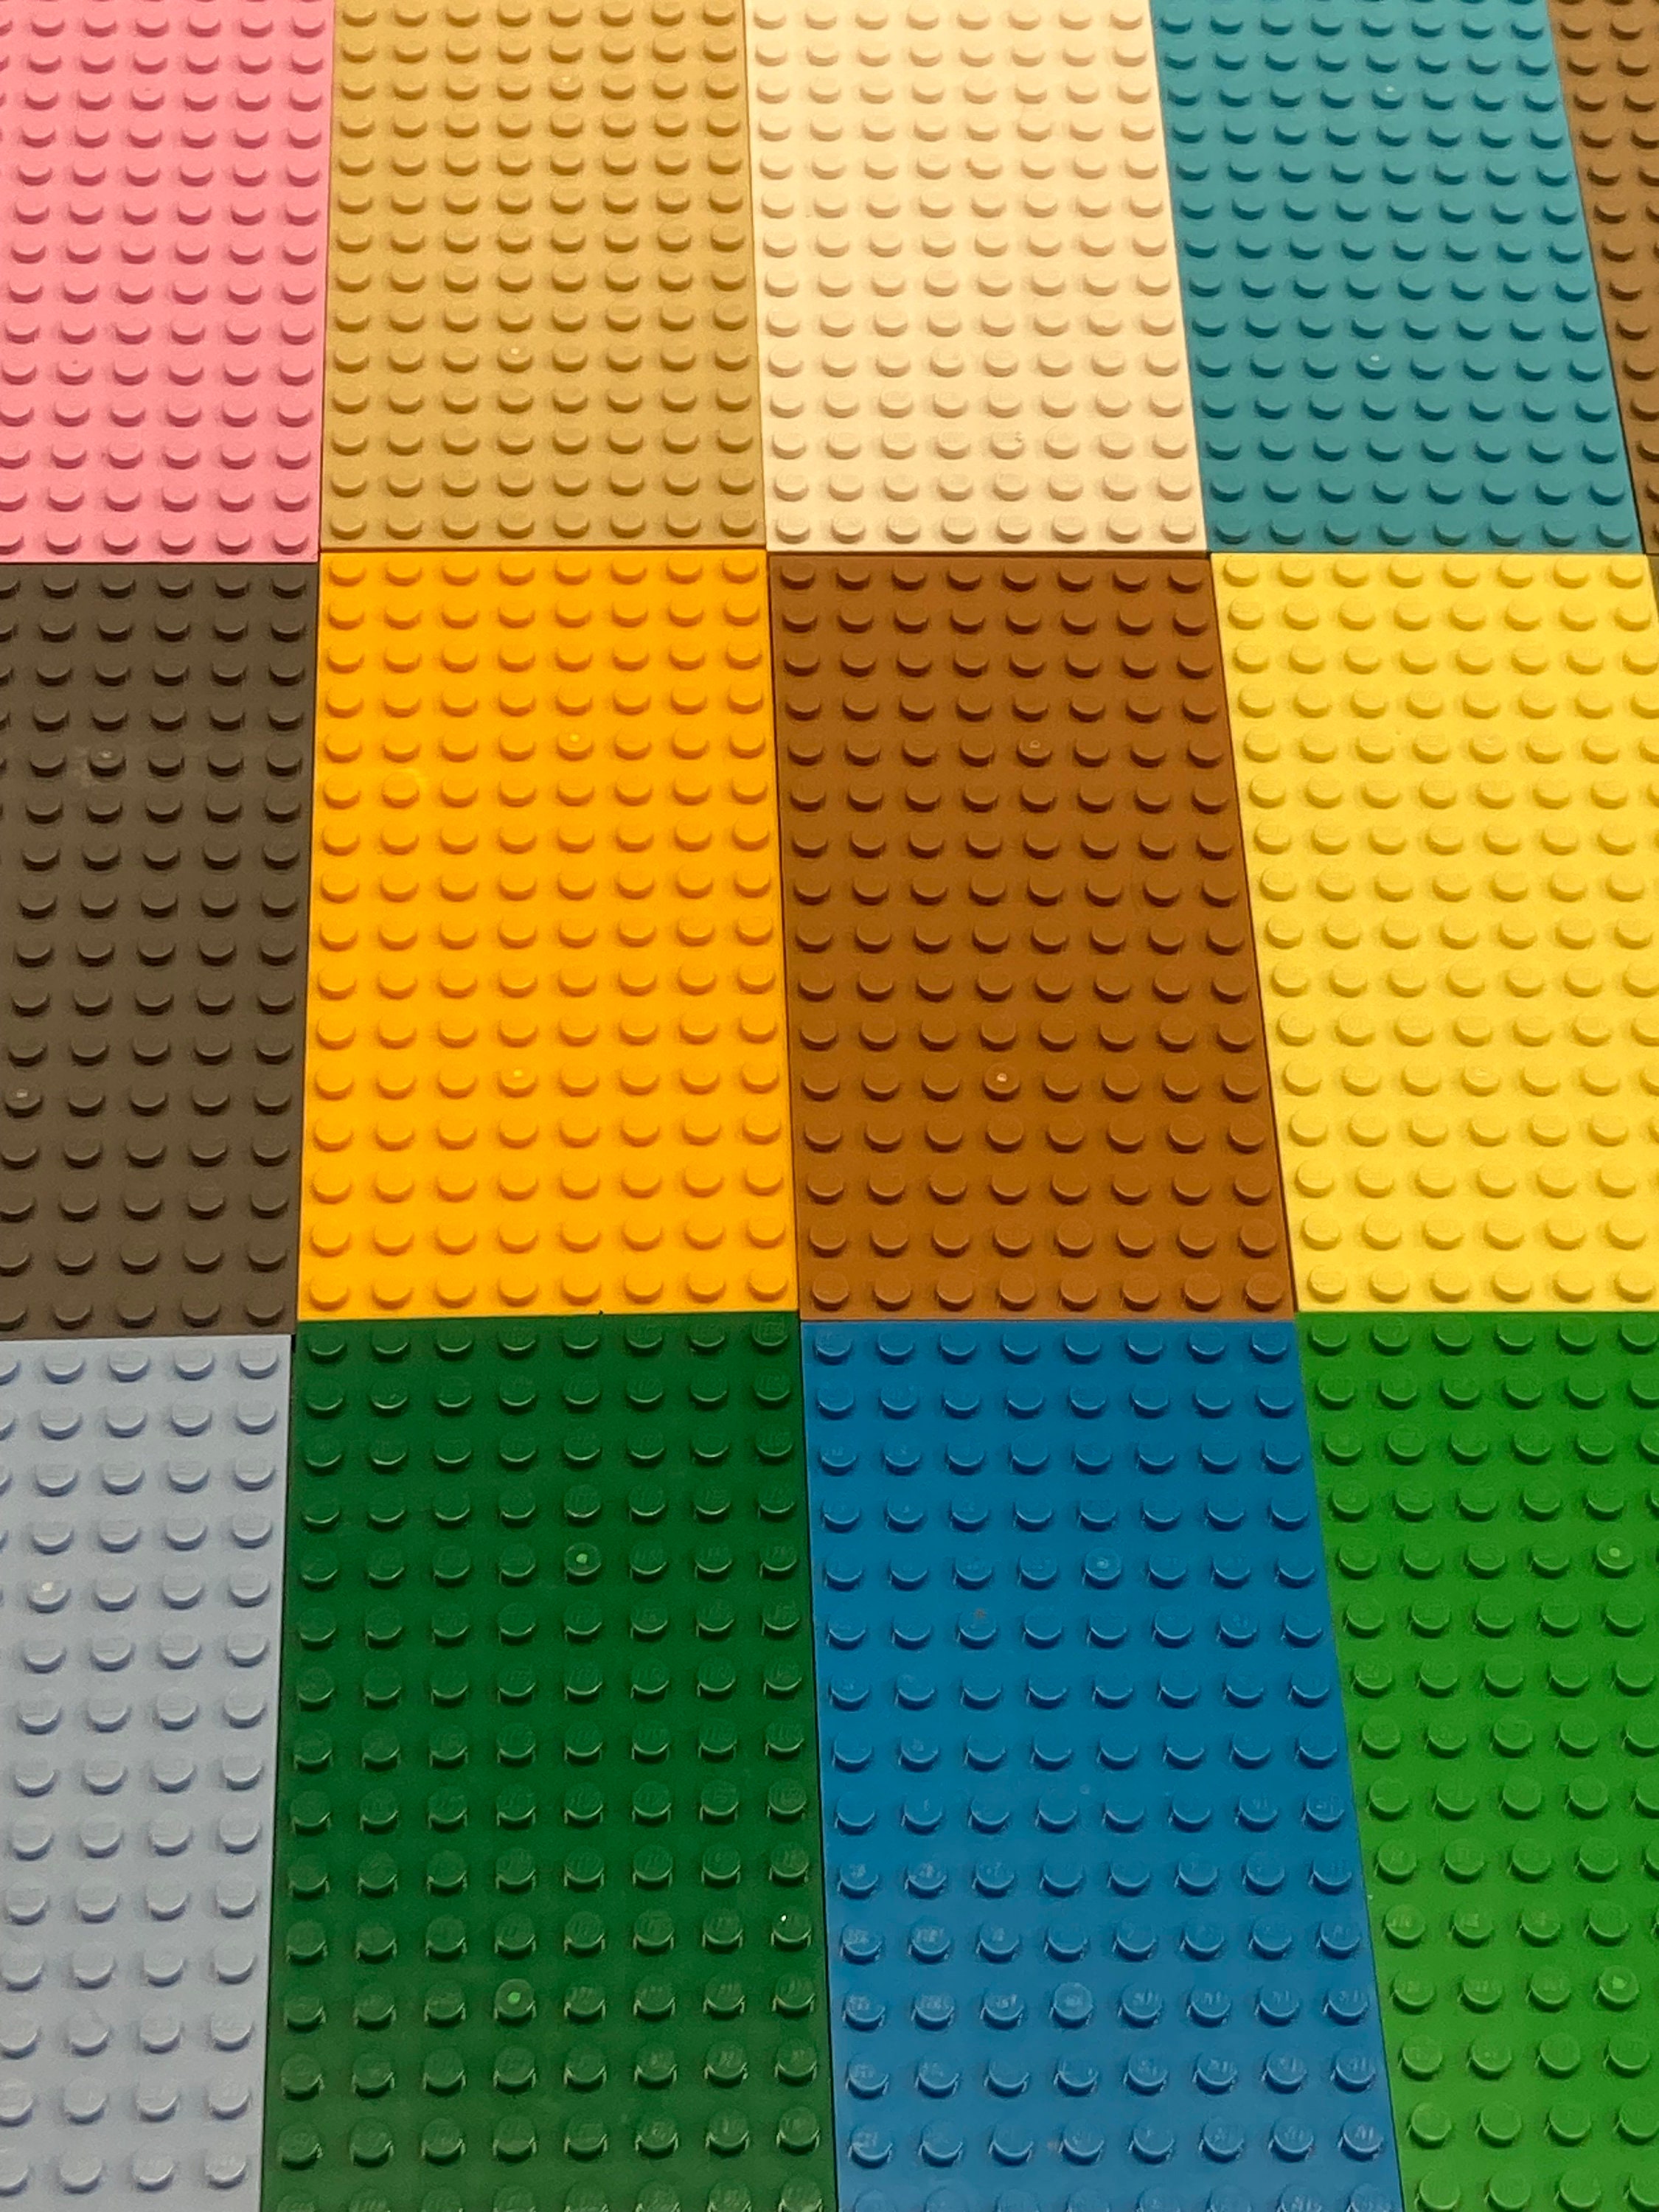 Plate 8 X 16 Studs Genuine Etsy 100% Clean LEGO® - You the Pick COLOR